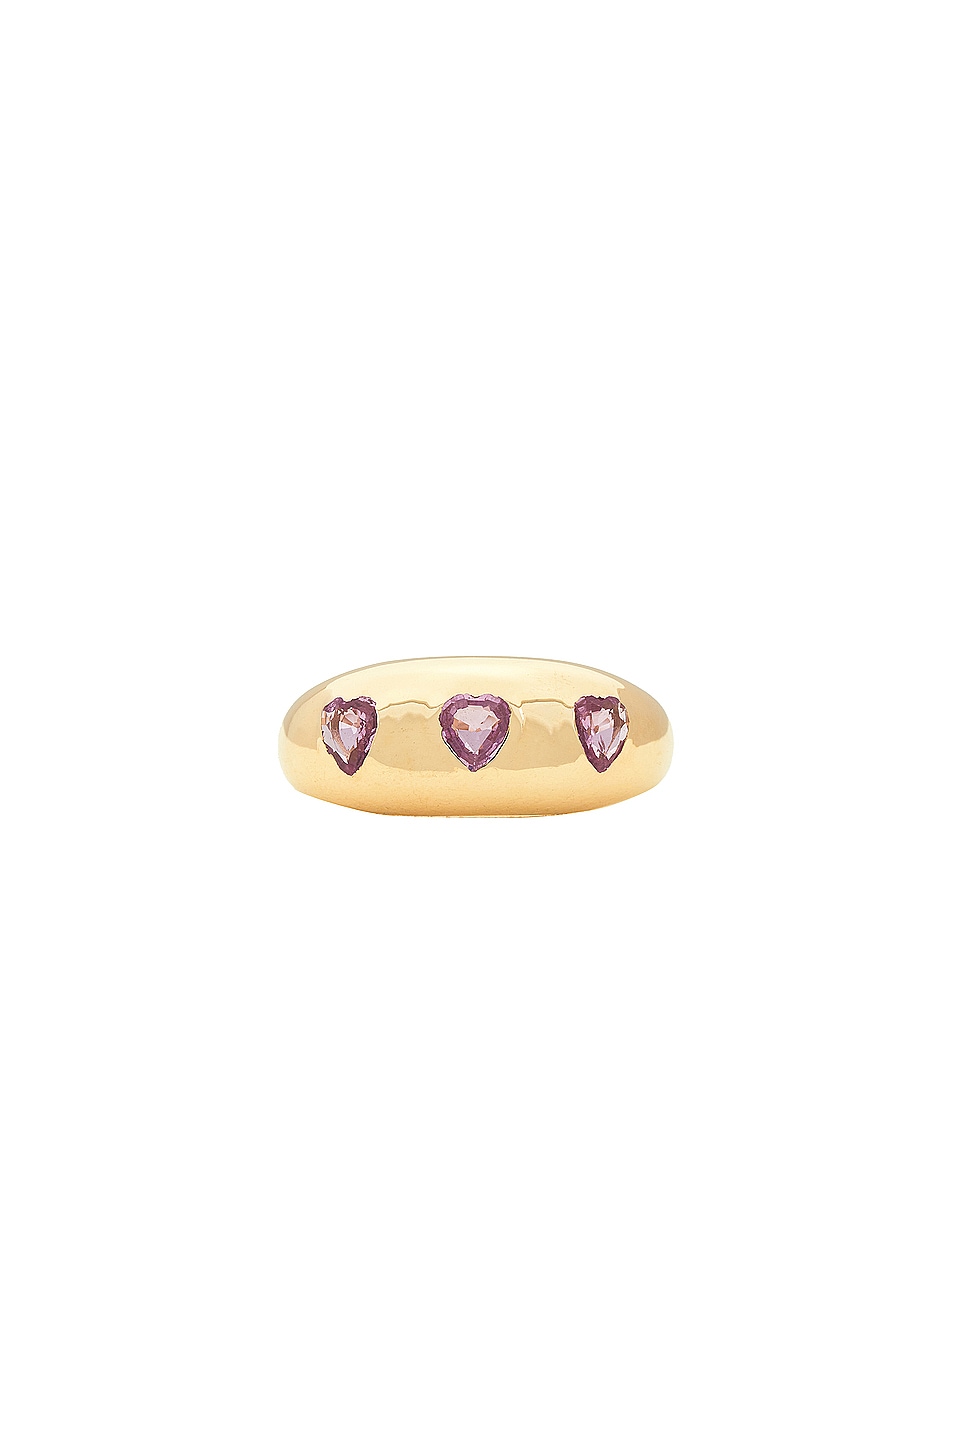 Image 1 of Siena Jewelry Heart Gypsy Ring in 14k Yellow Gold & Pink Sapphire